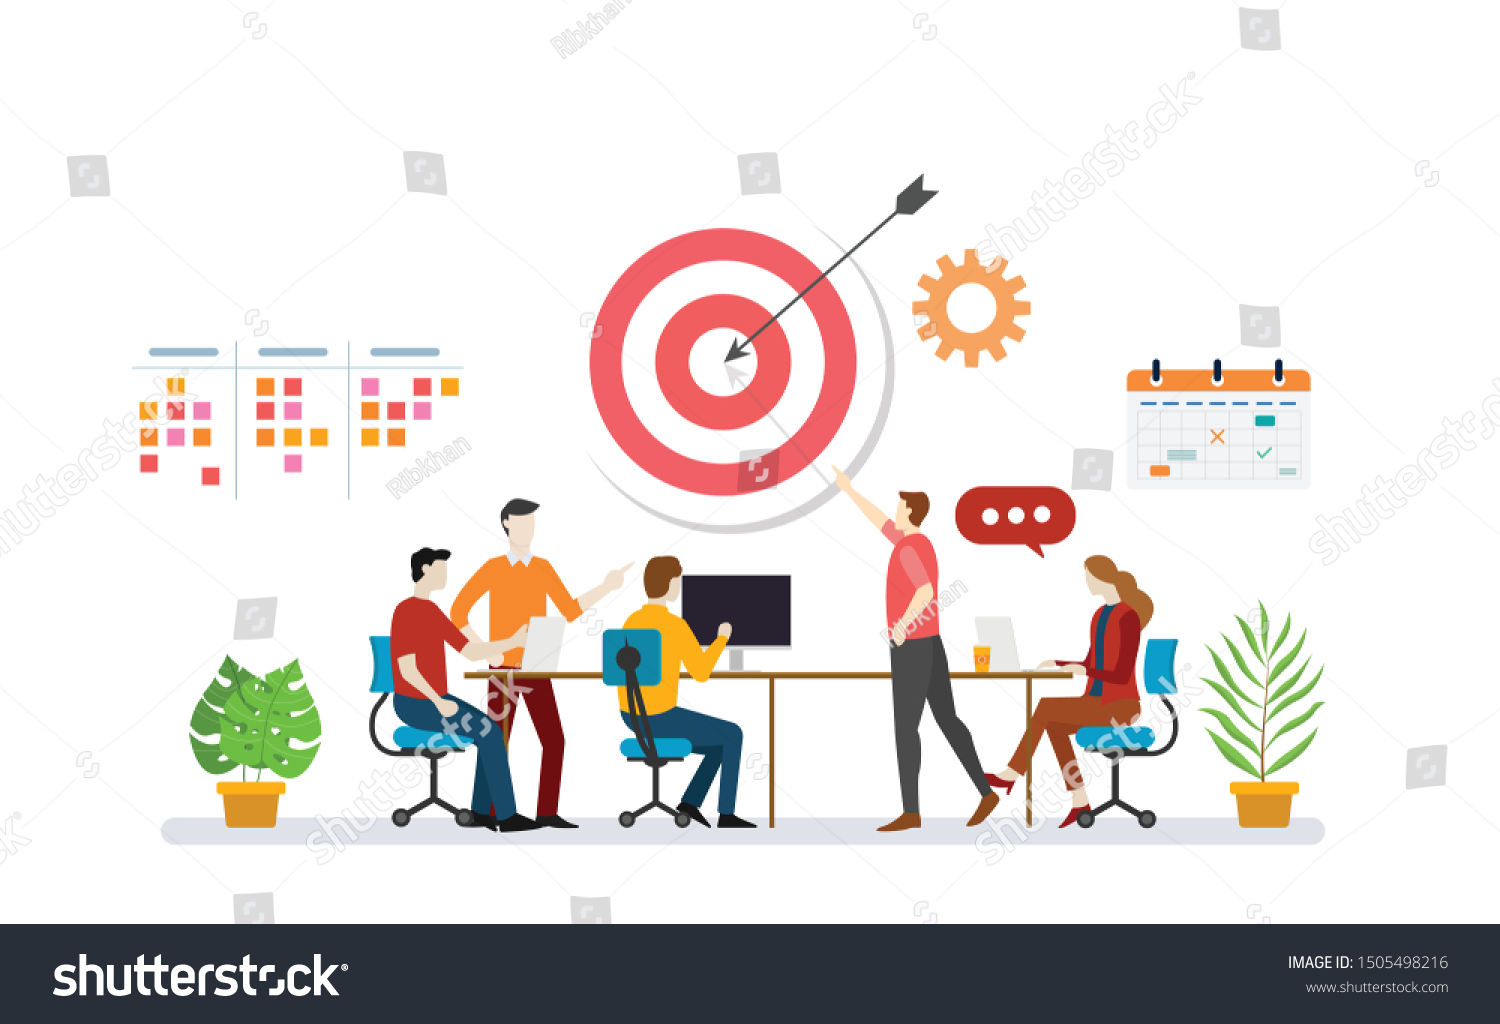 SVG of business plan target with team discussion to achieve target goals with to do list task and calendar icon - vector svg